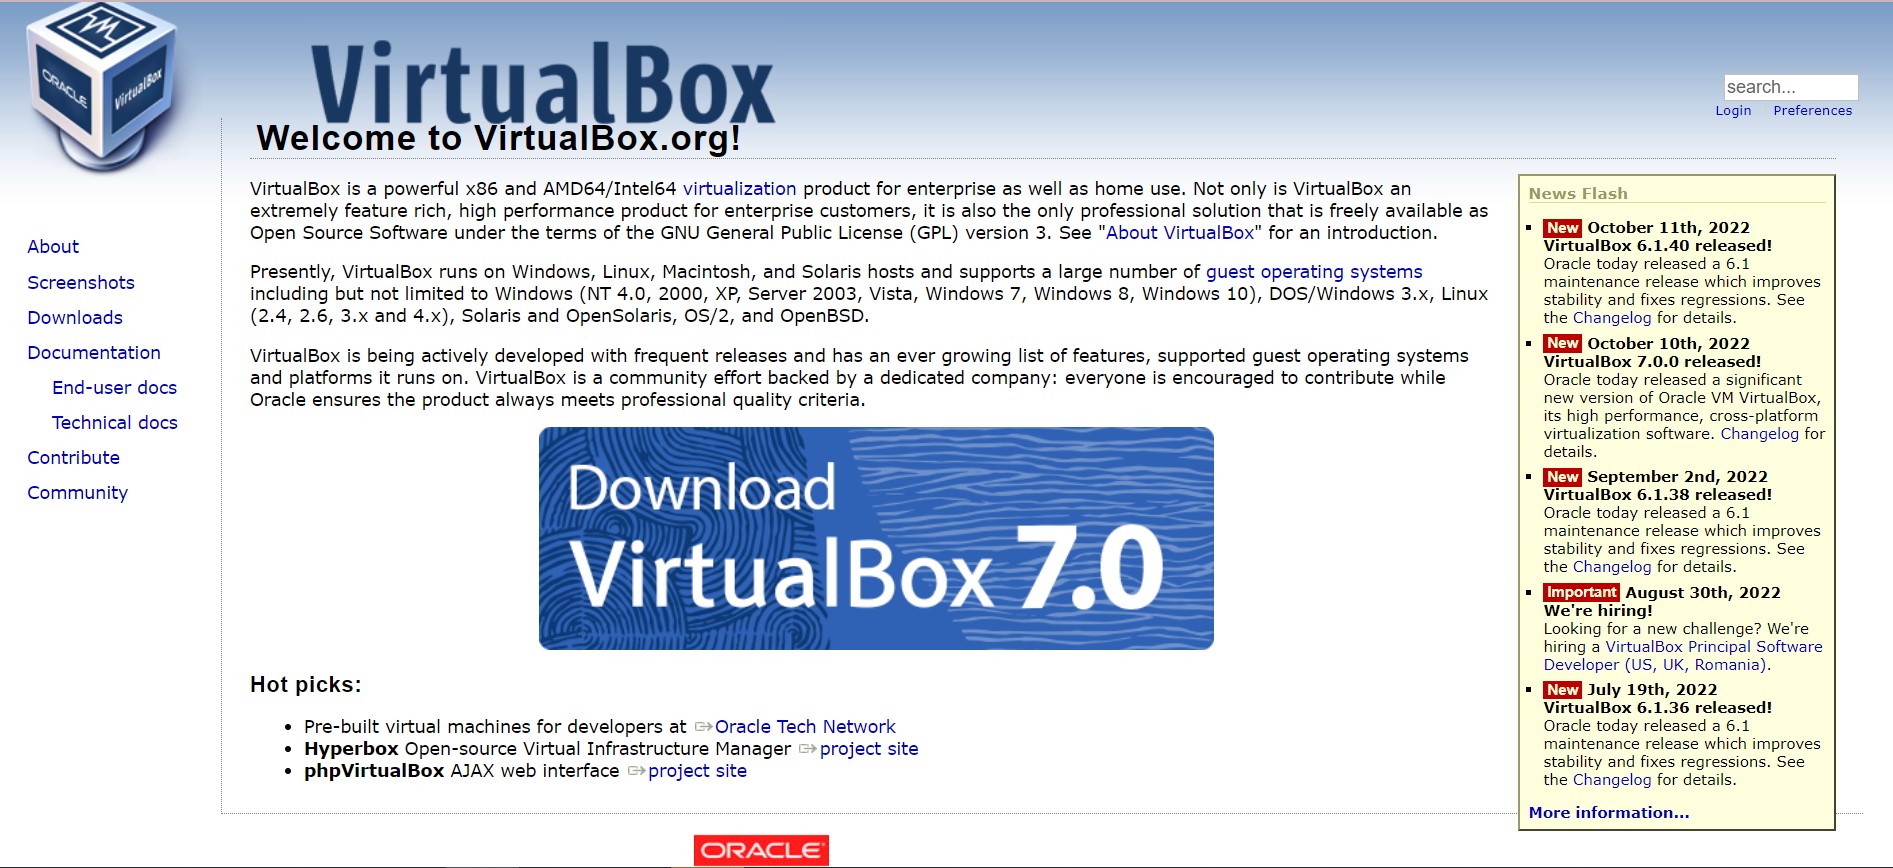 Decorative image: Screenshot of Virtualbox.org with a large blue download button